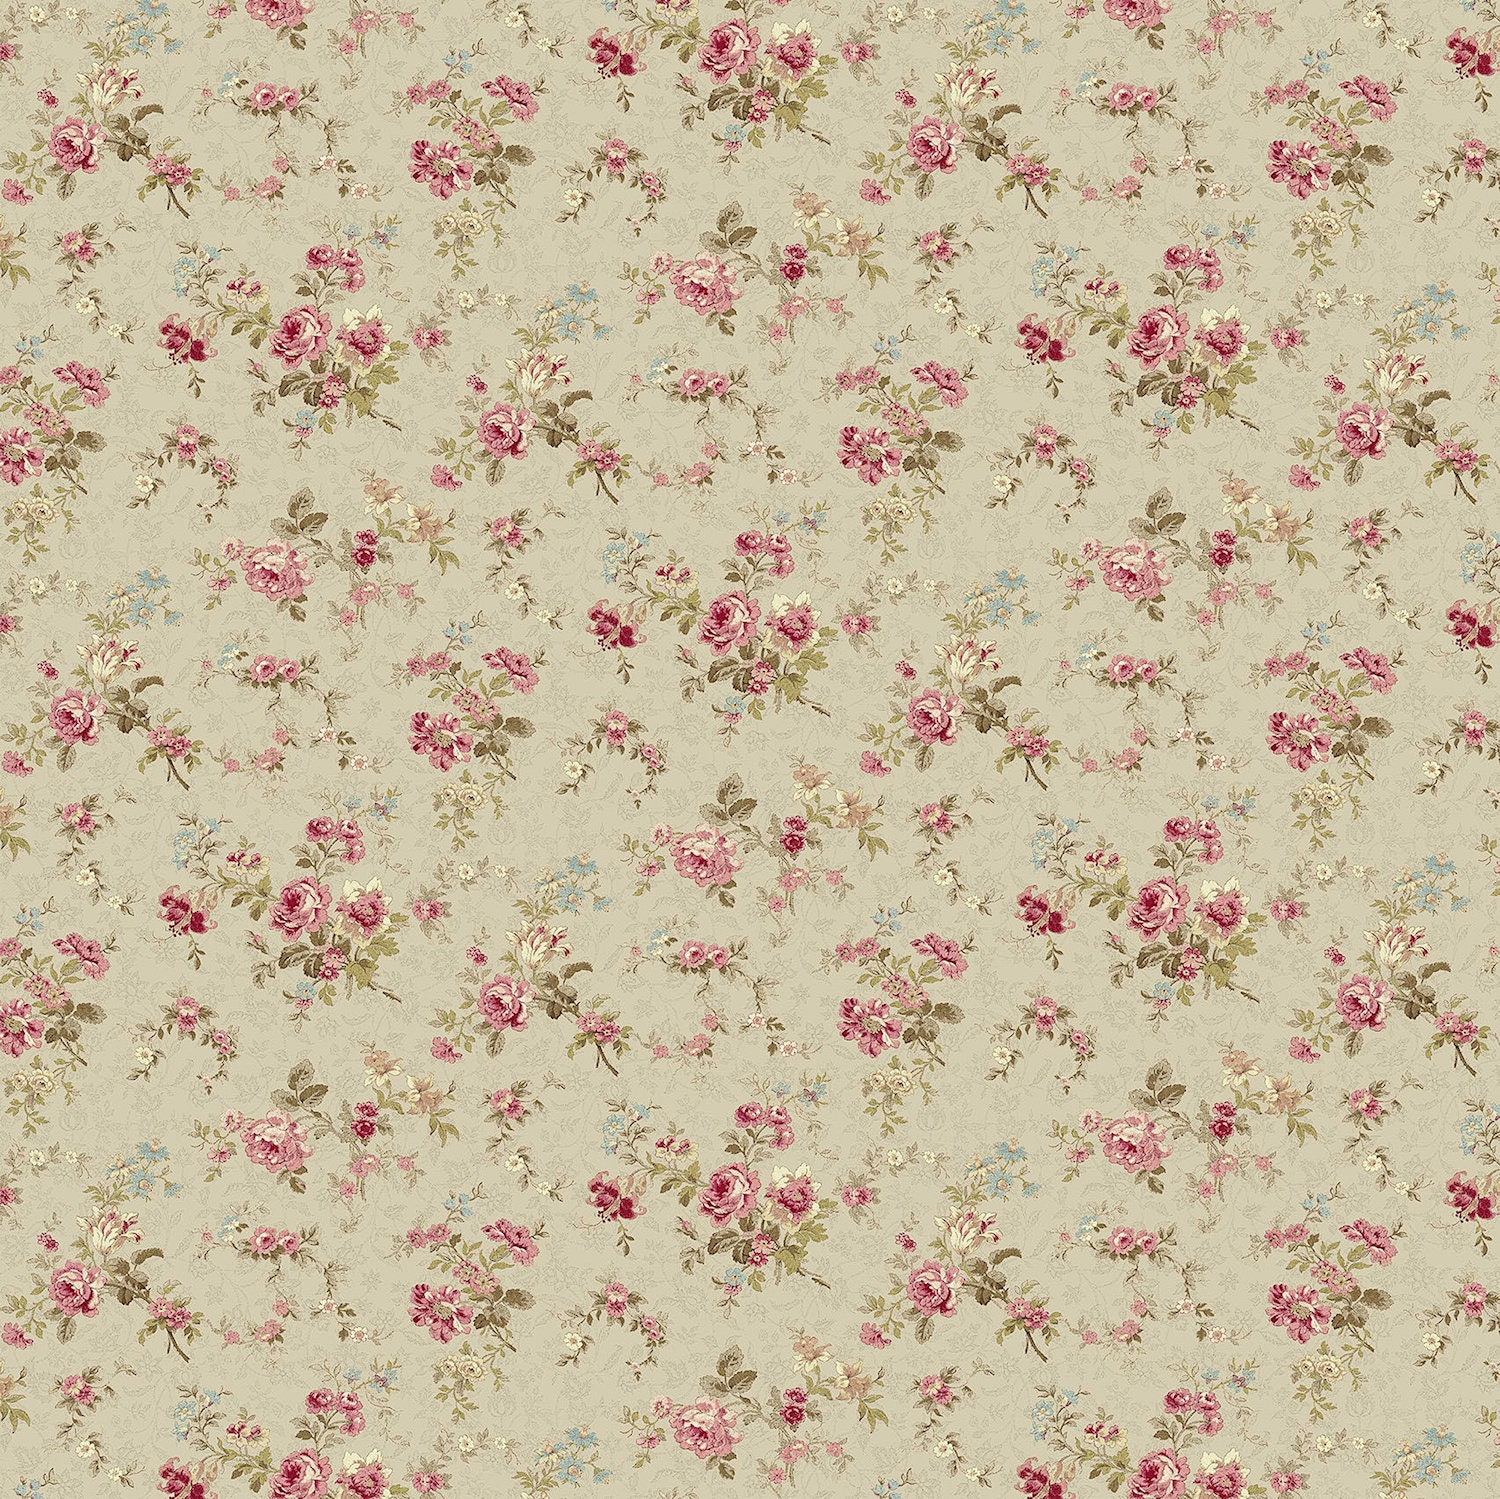 Dollhouse Miniature Shabby Chic Wallpaper Mauve and Brown Floral Flowers 1:12 